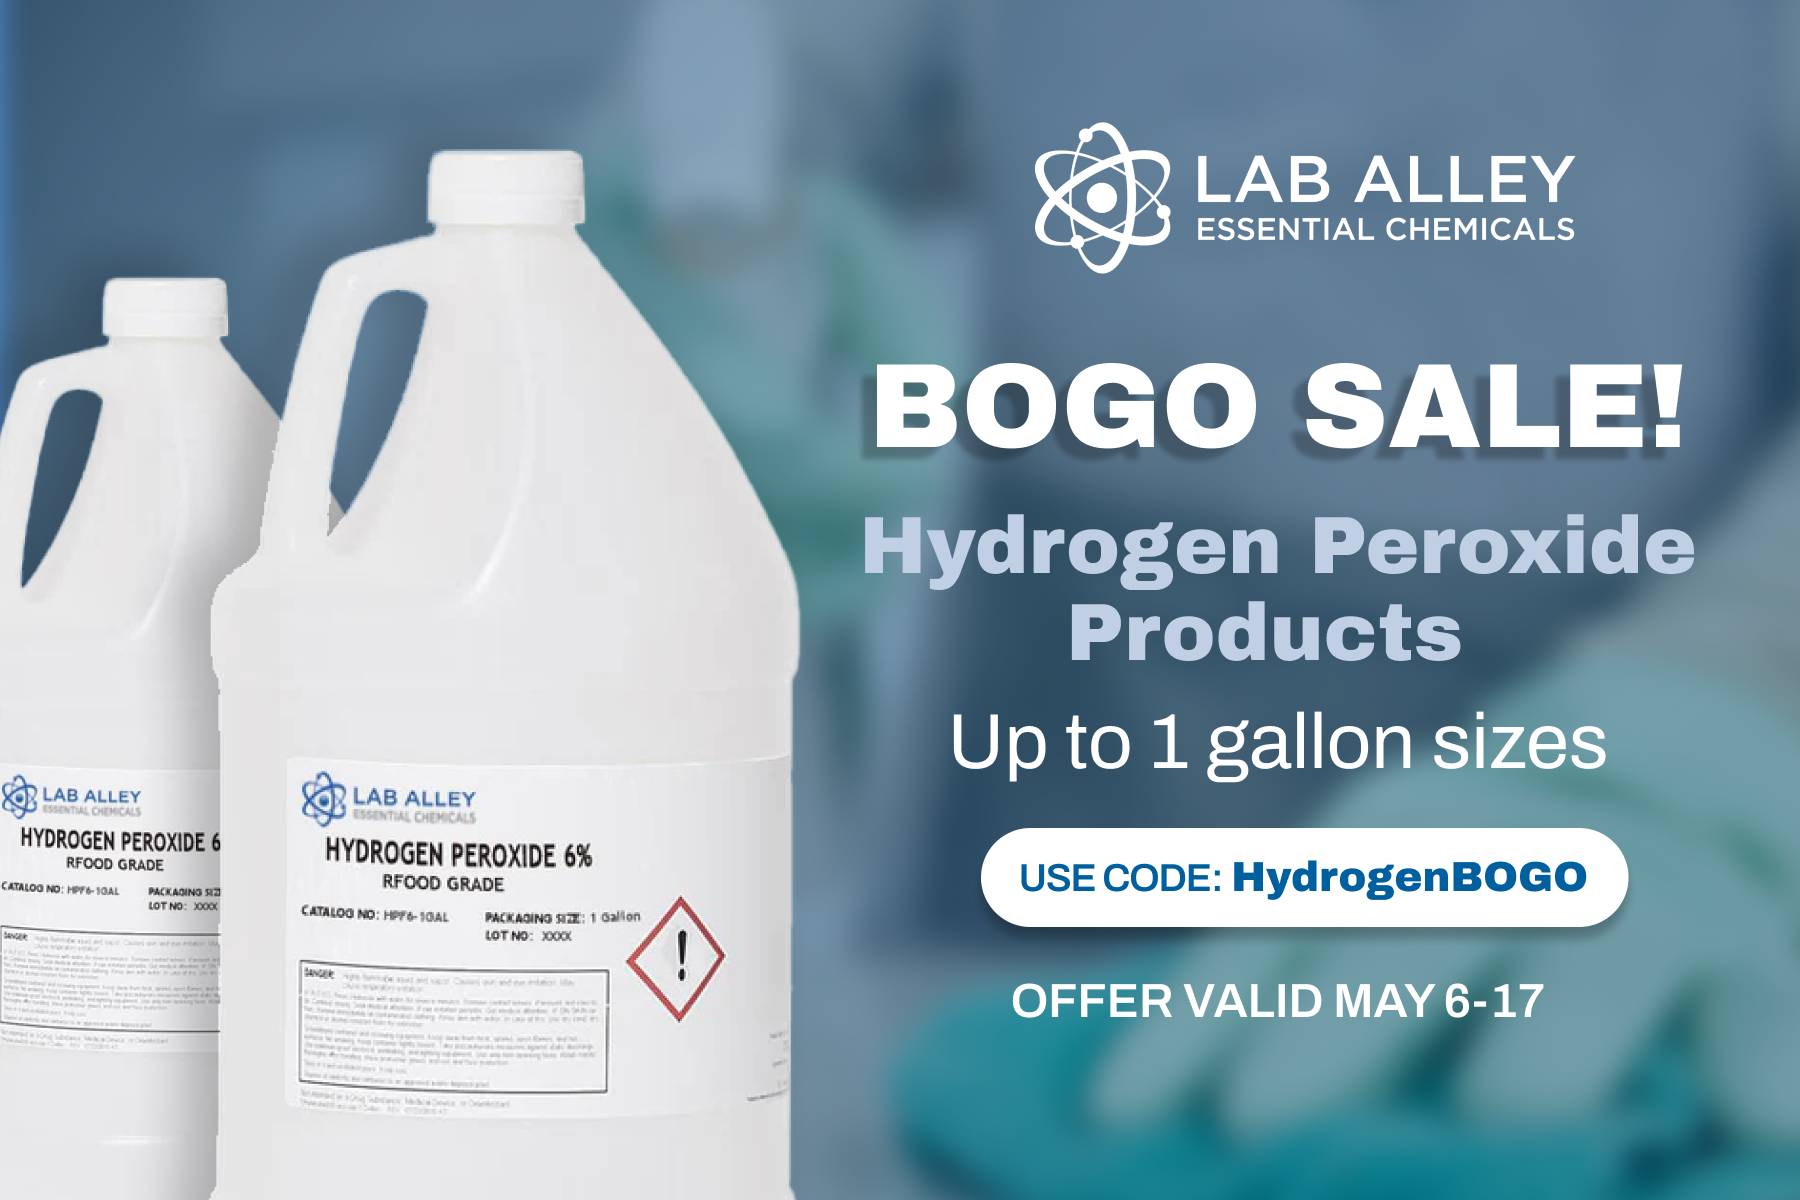 Buy One, Get One Free on ALL 1 Gallon or Less of Hydrogen Peroxide!